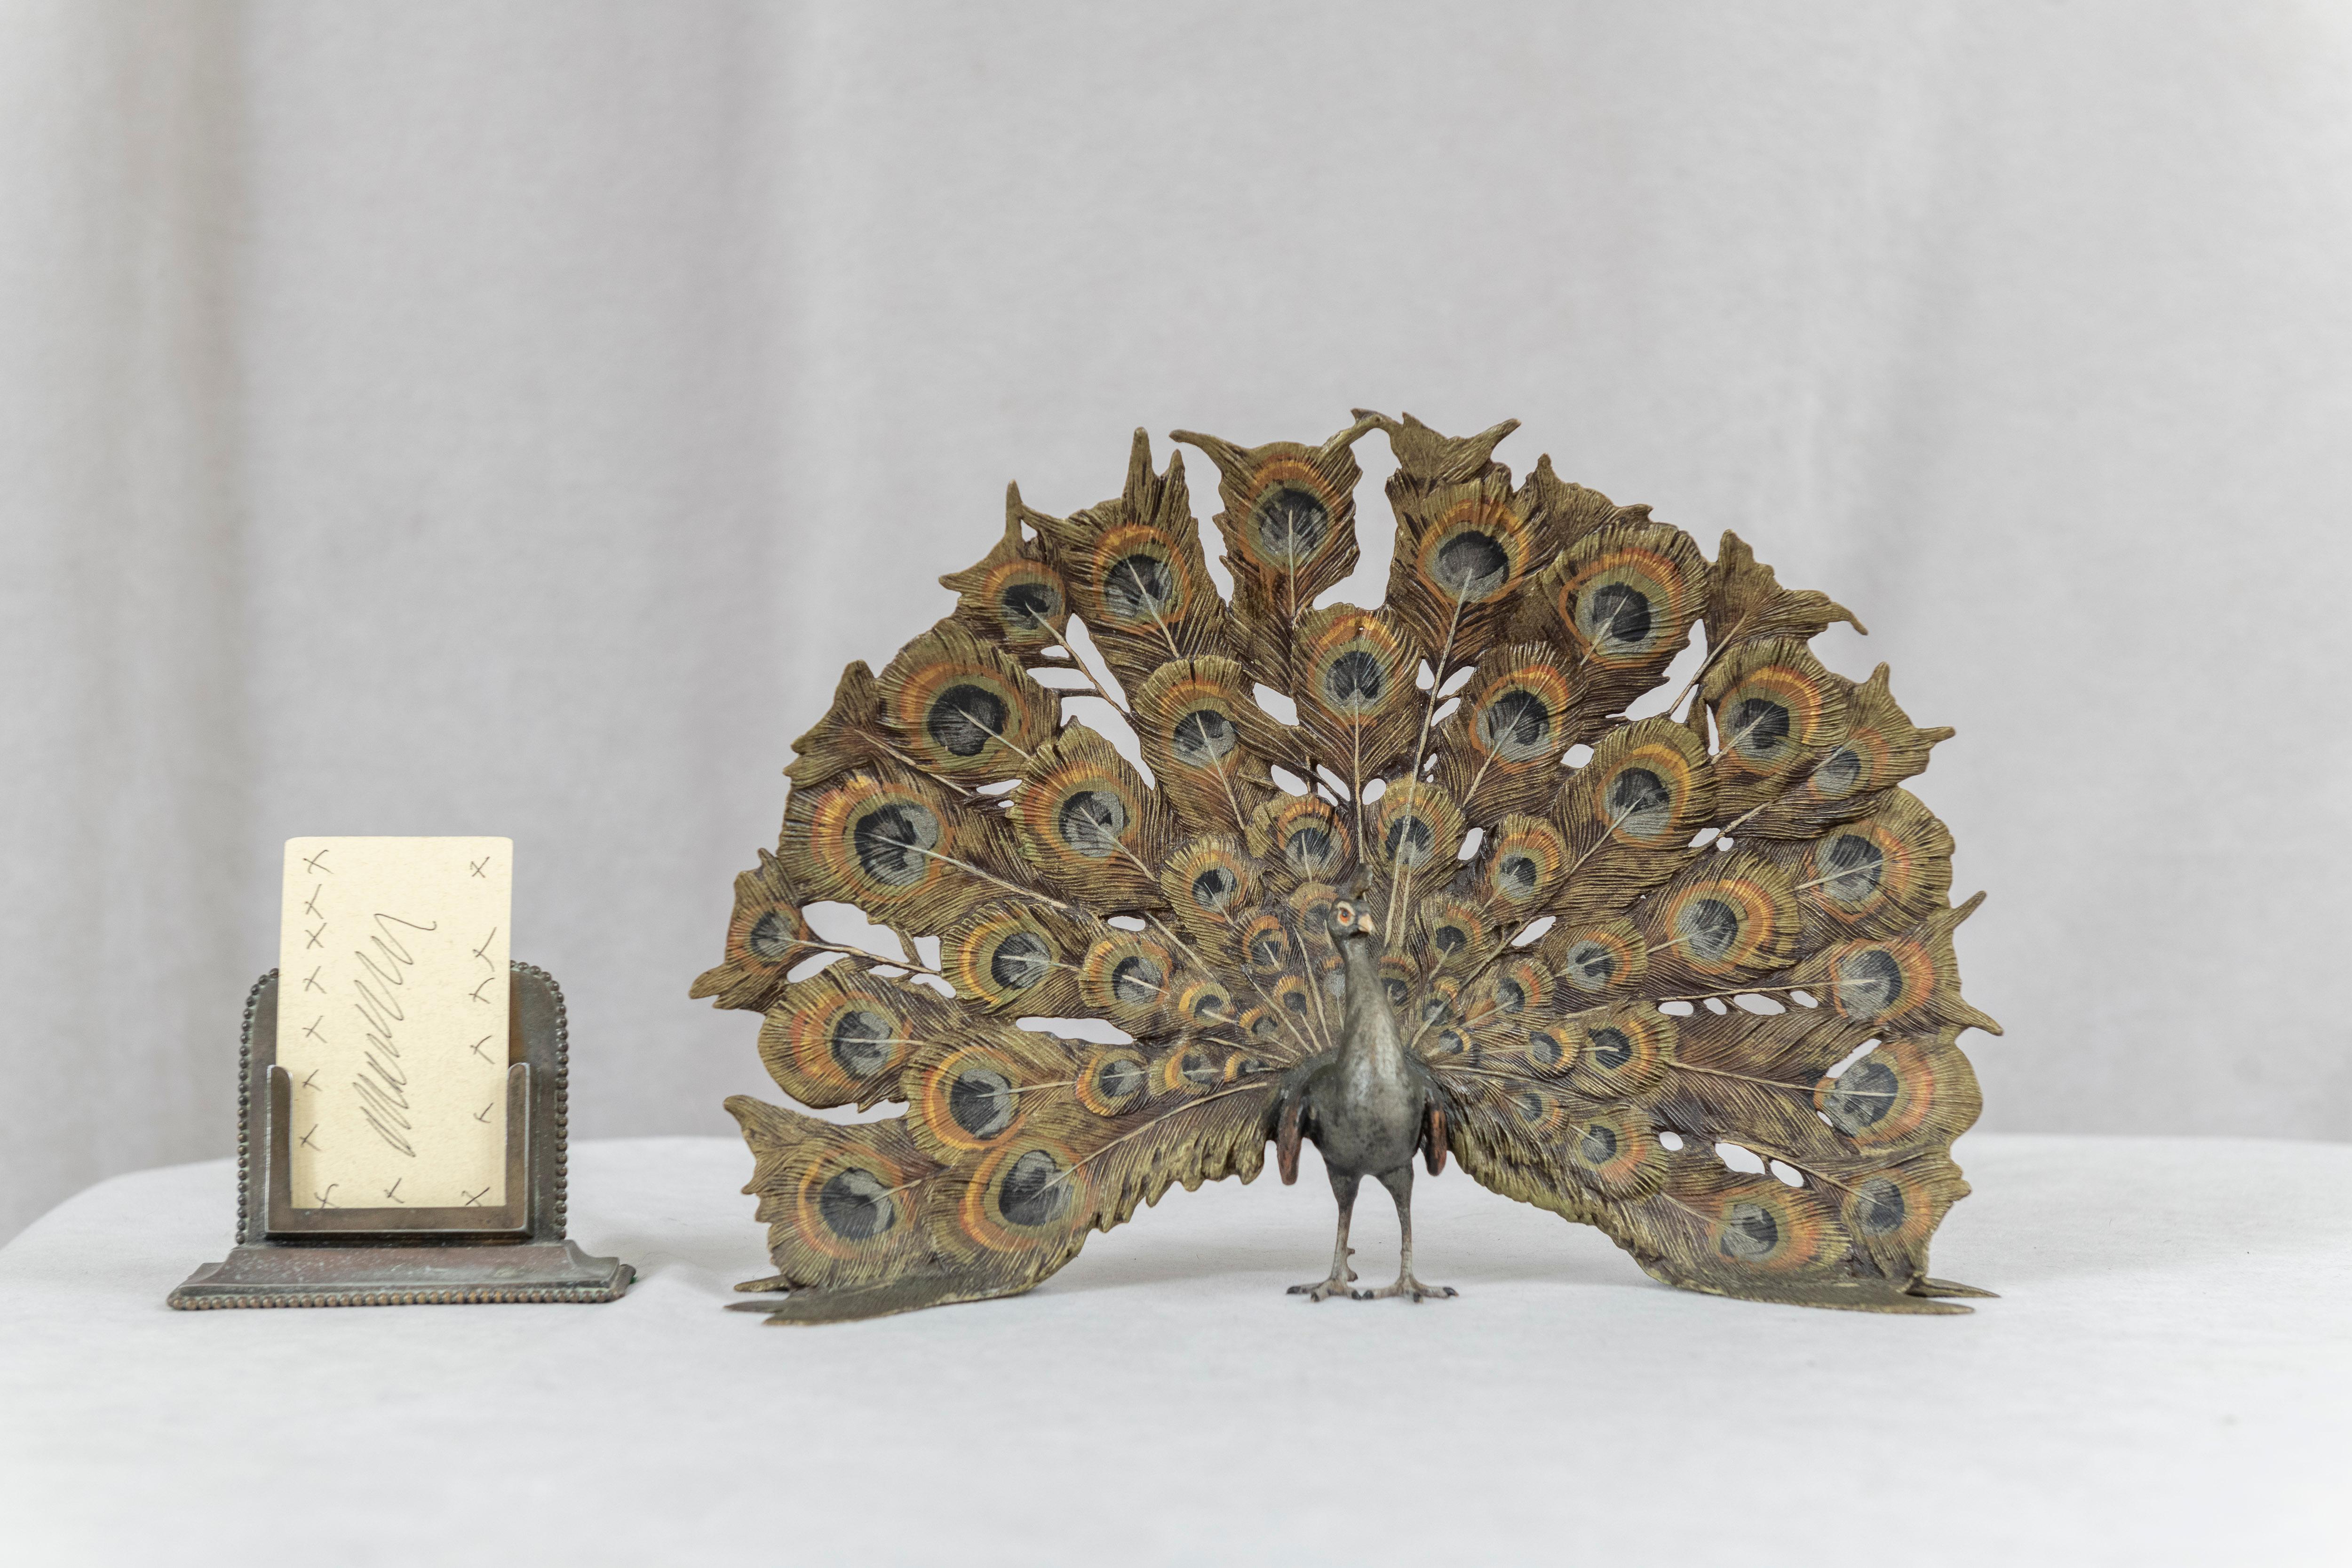  This large and colorful bronze peacock is the work of Franz Bergmann. Signed on the back with his signature of a 